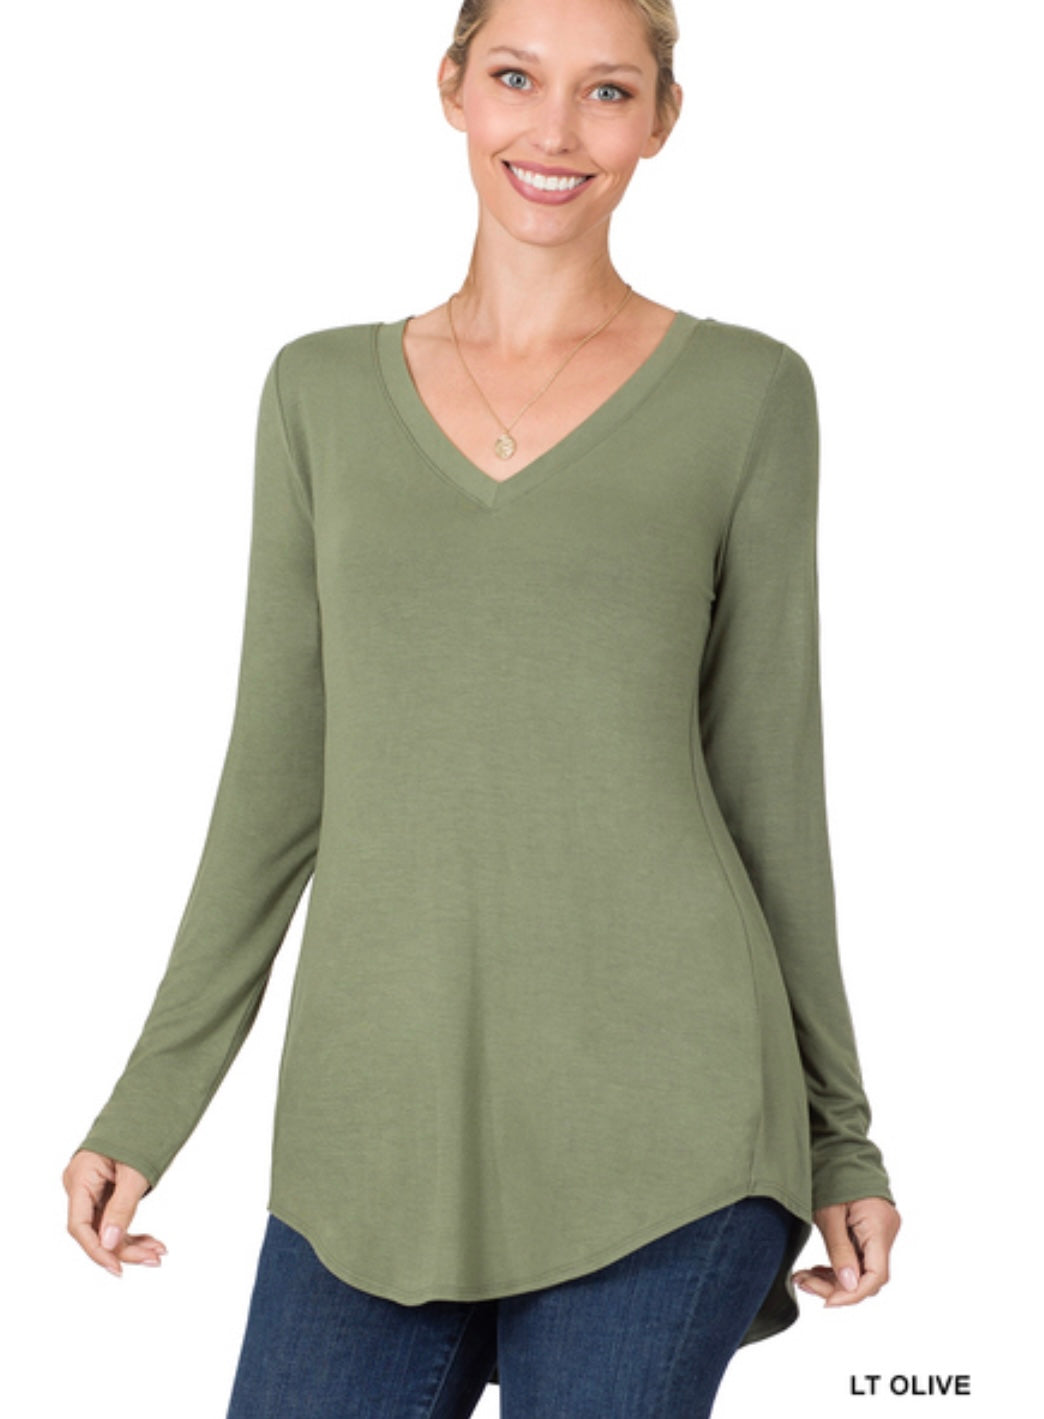 Doorbuster! Luxe Rayon Long Sleeve V-Neck Top - 7 Colors Available!